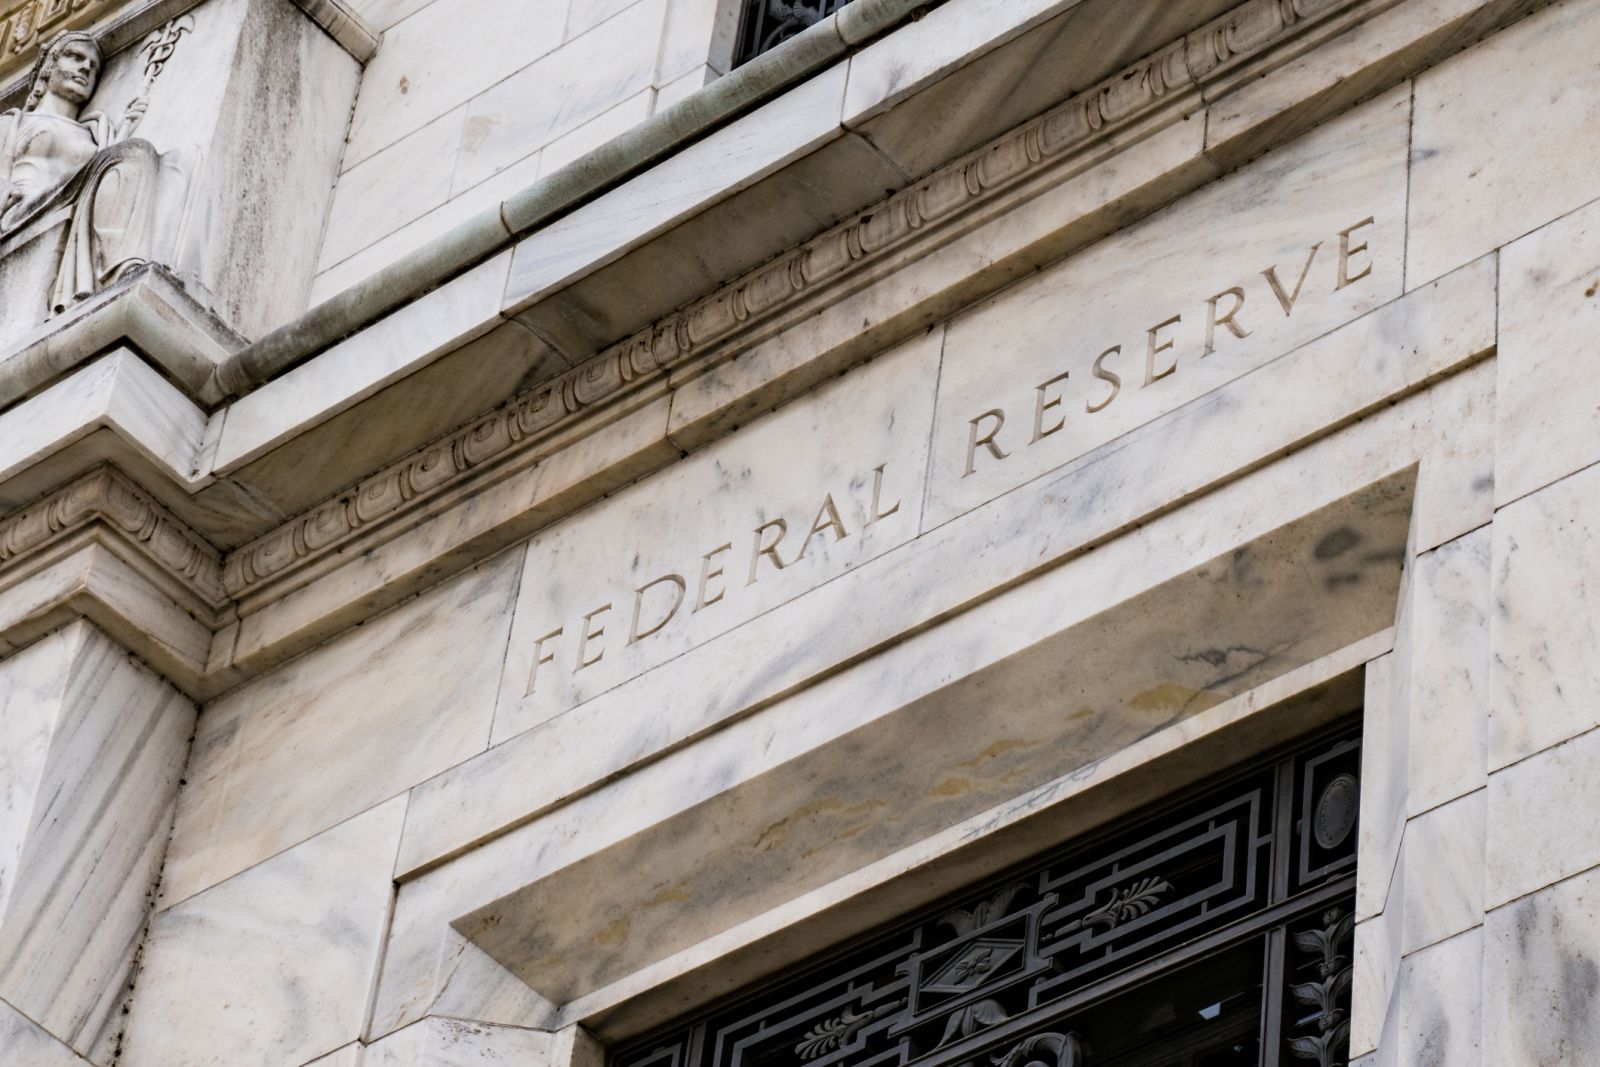 Government - Federal Reserve 1